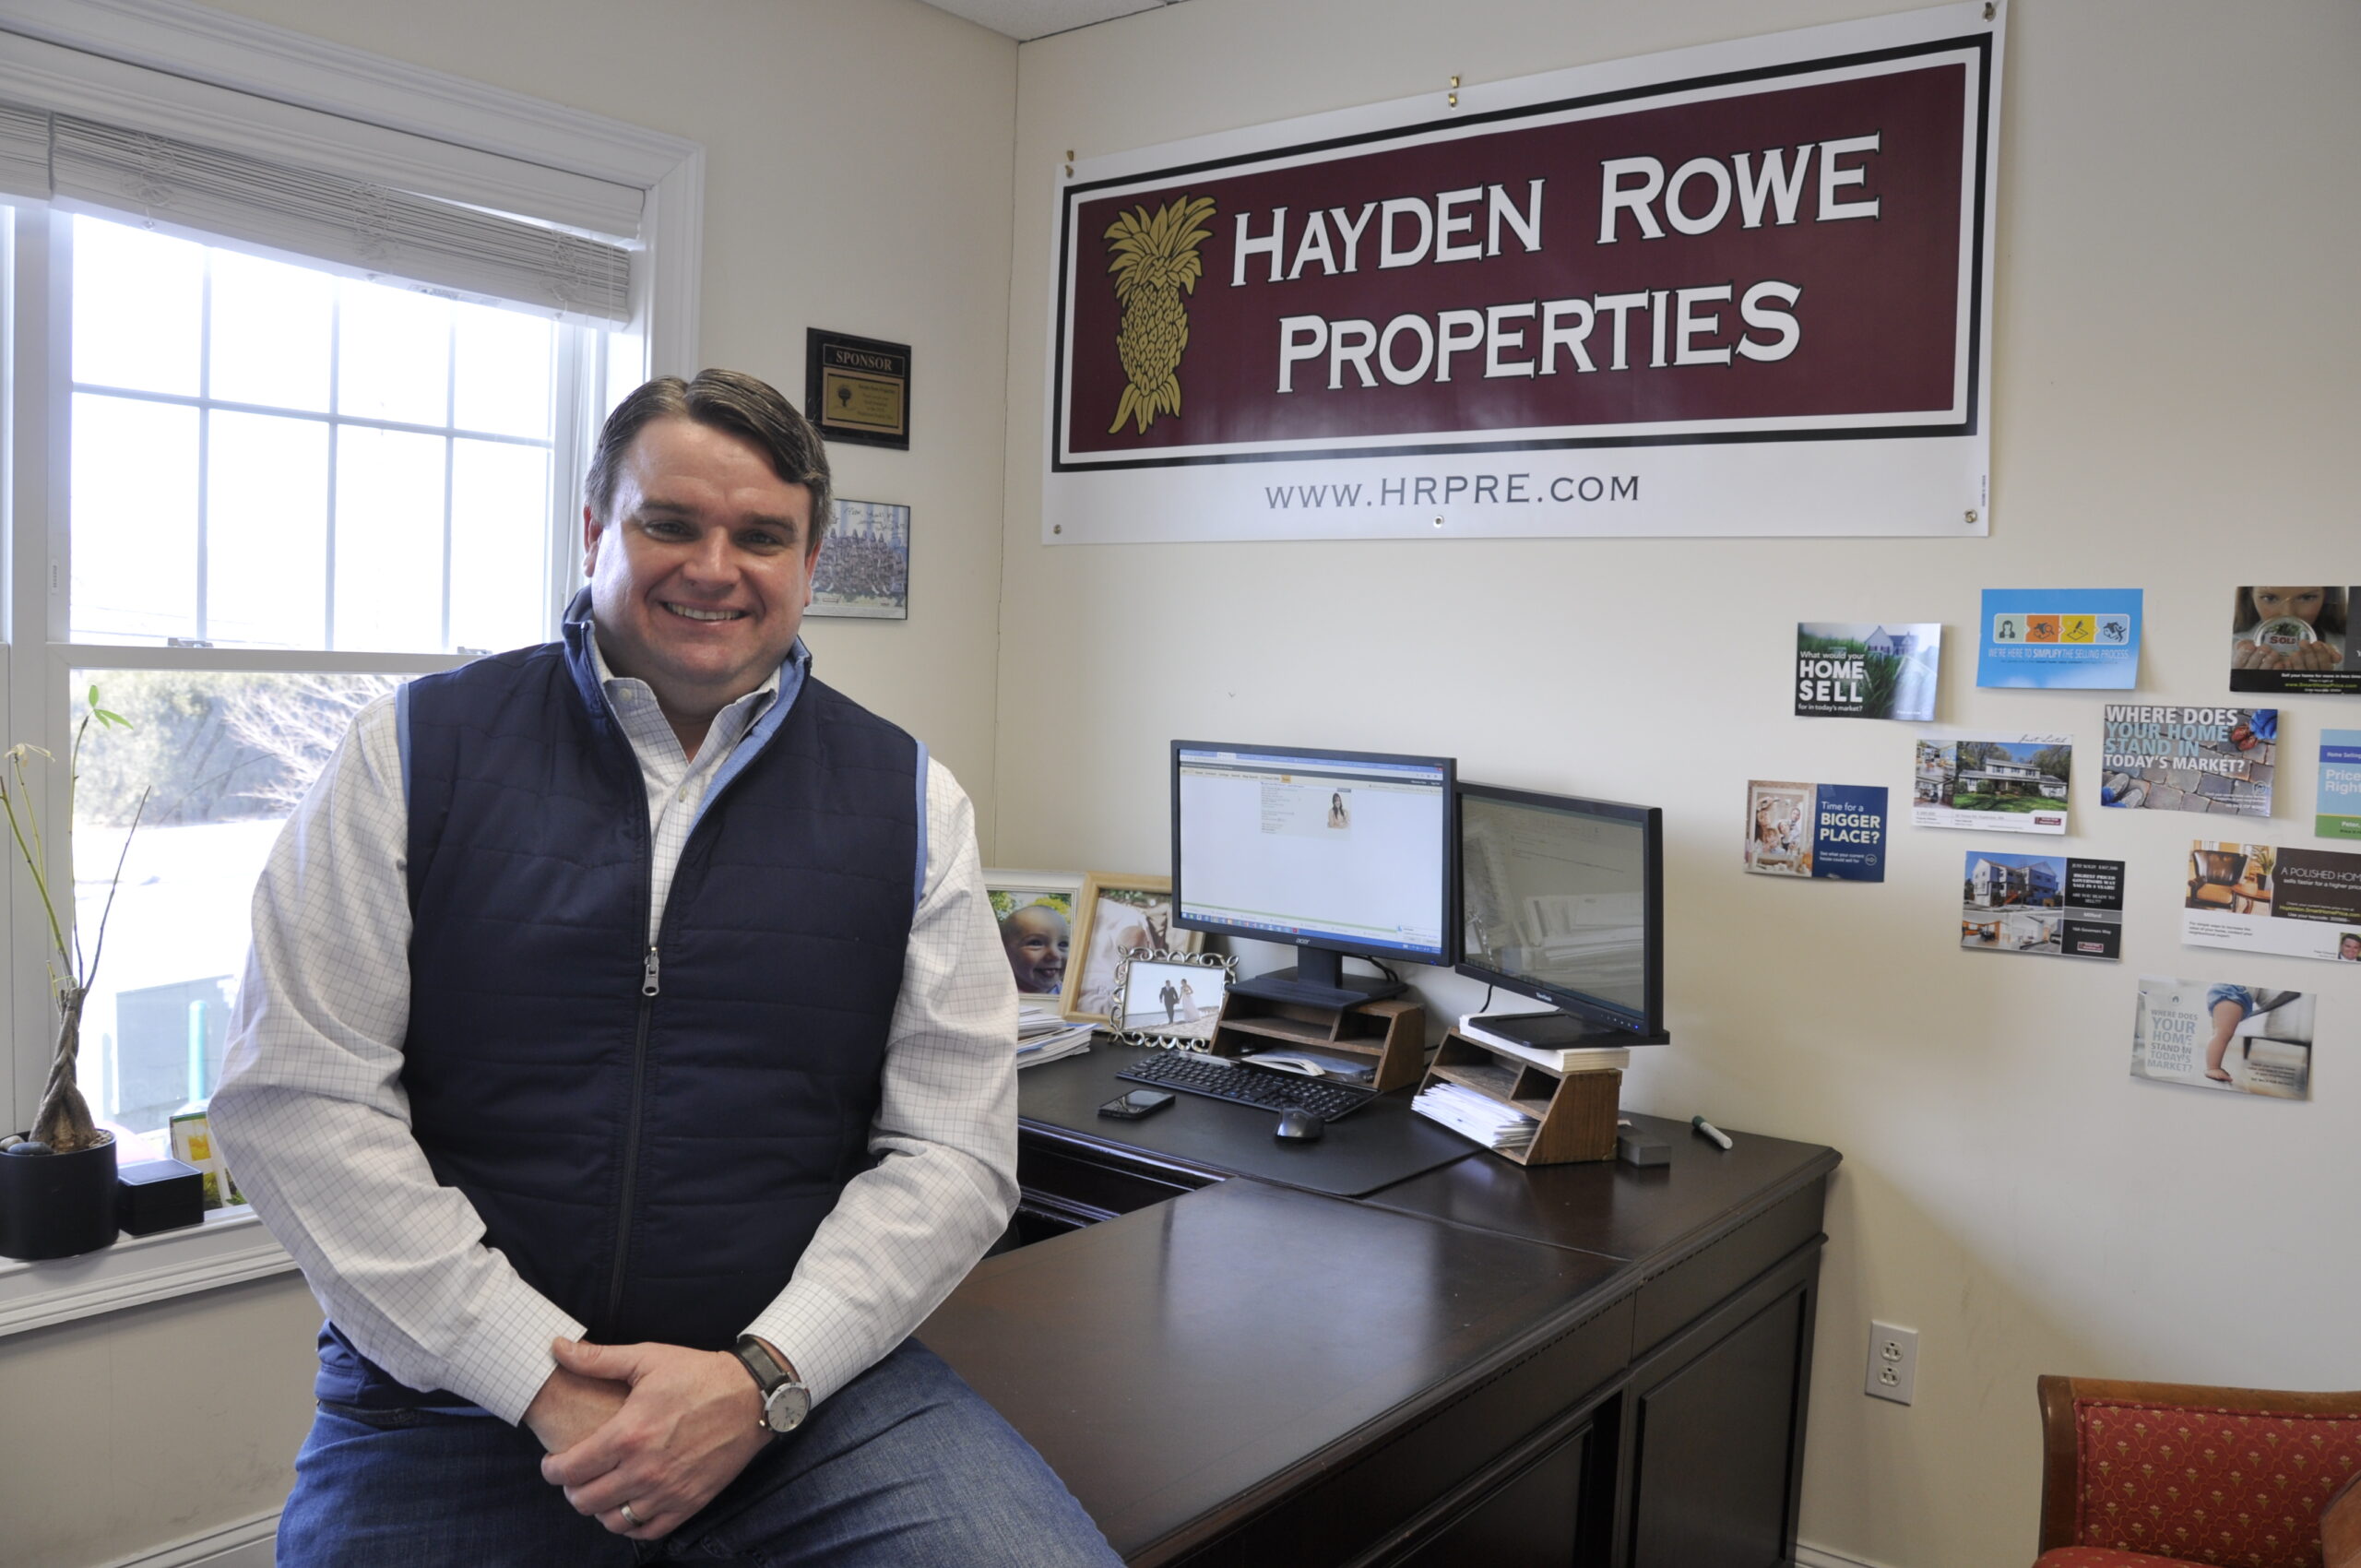 Business Profile: Hayden Rowe Properties, where every client matters